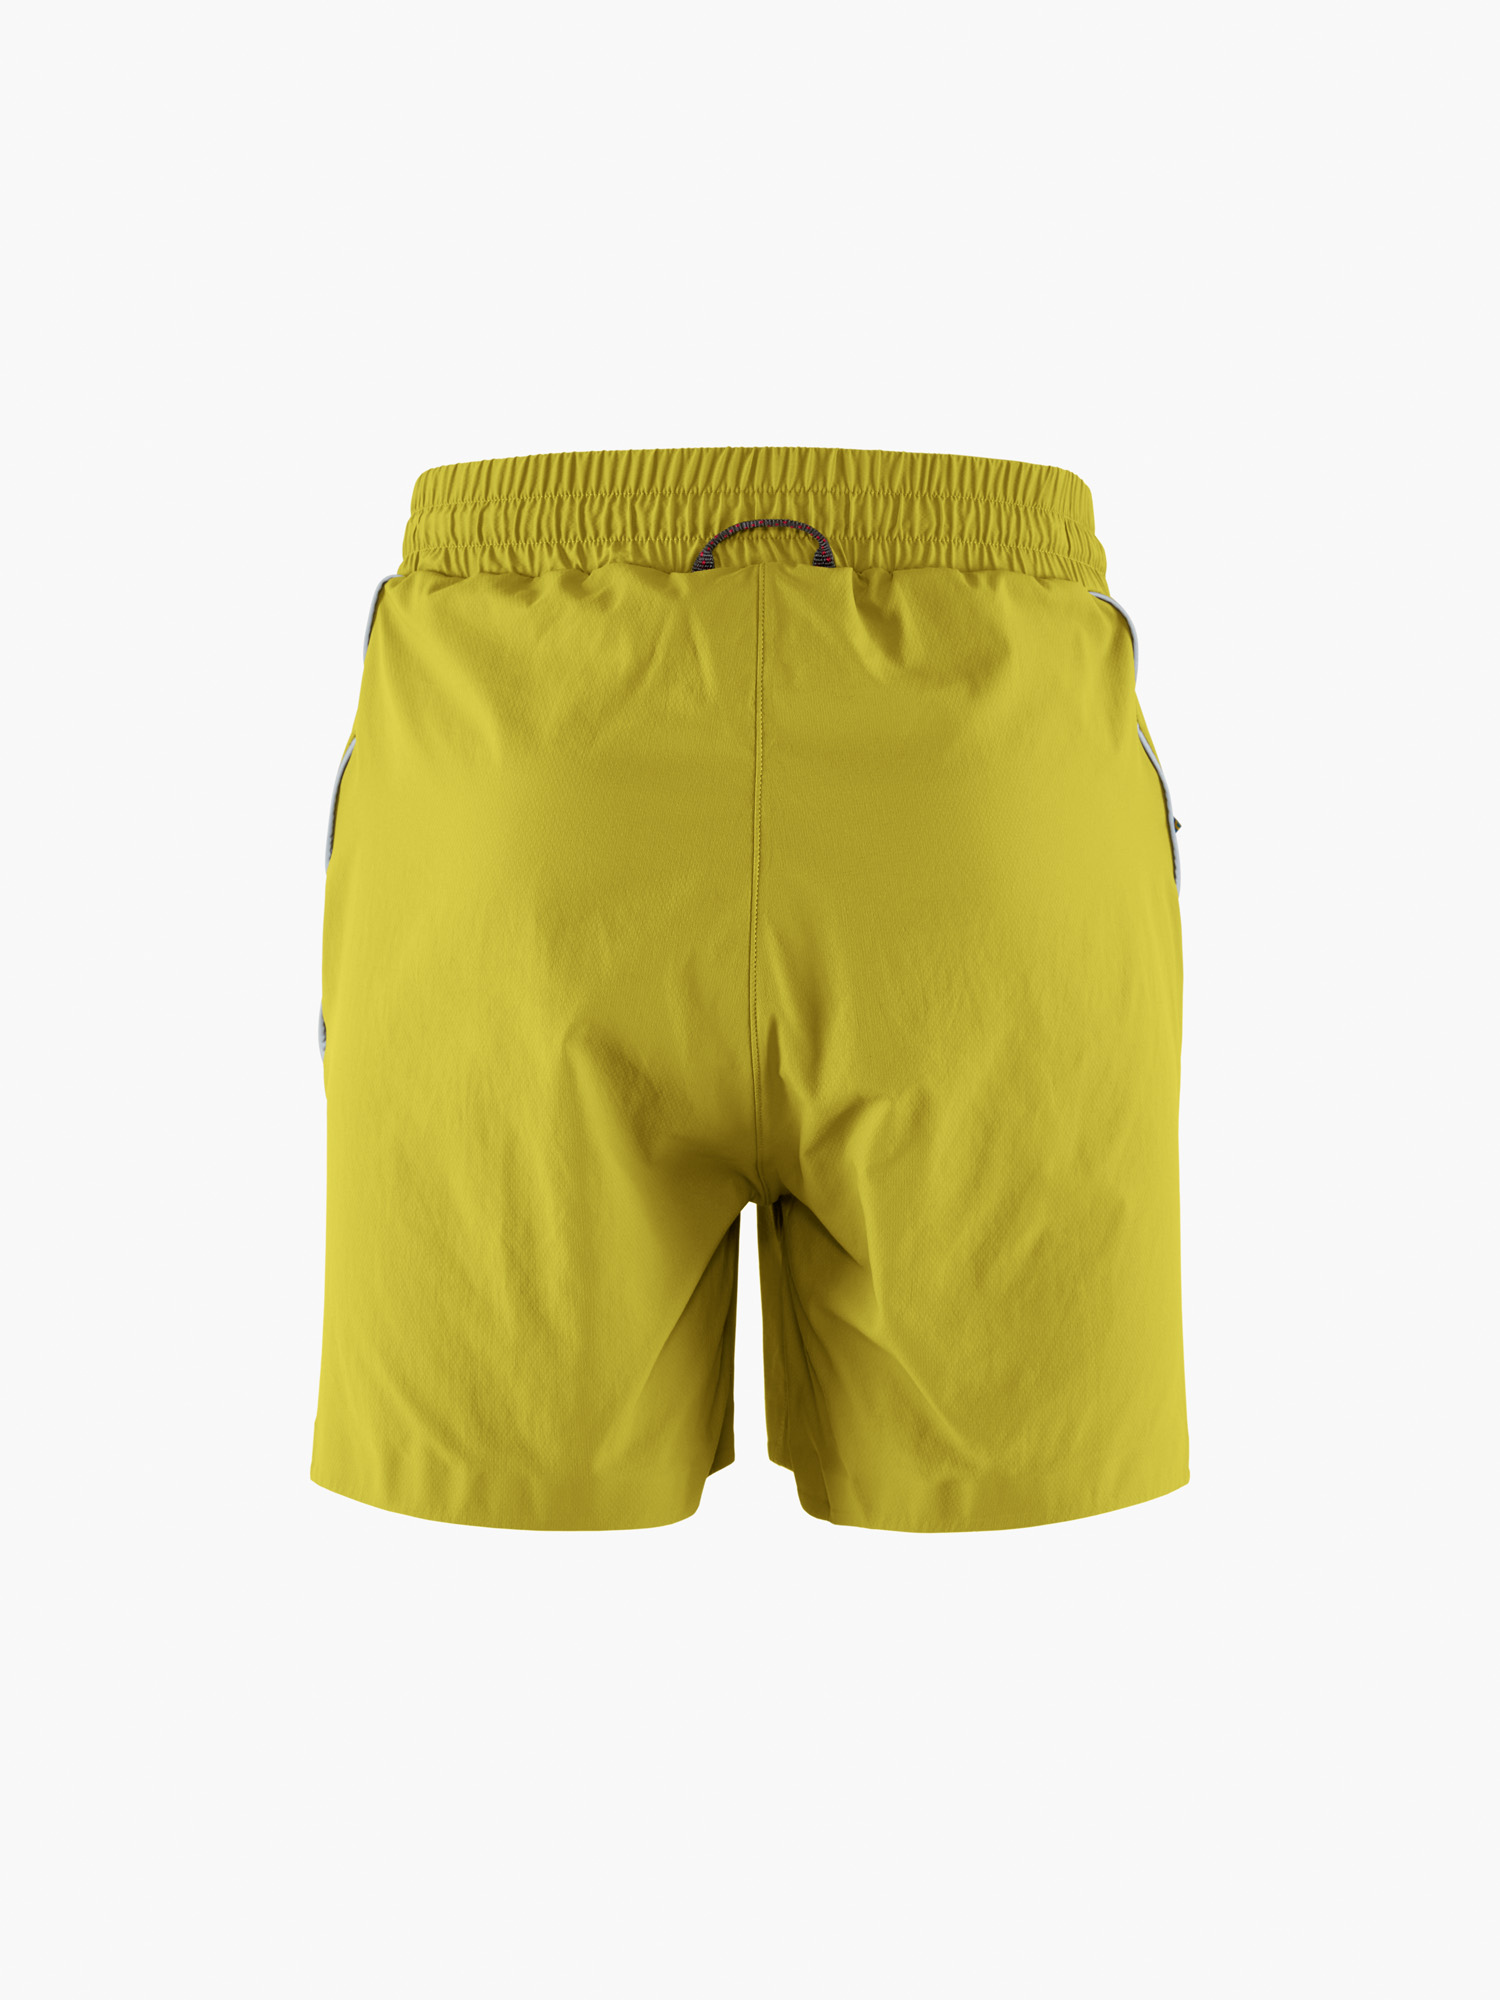 10112 - 74 Levitend Fast Shorts M's - Pine Sprout